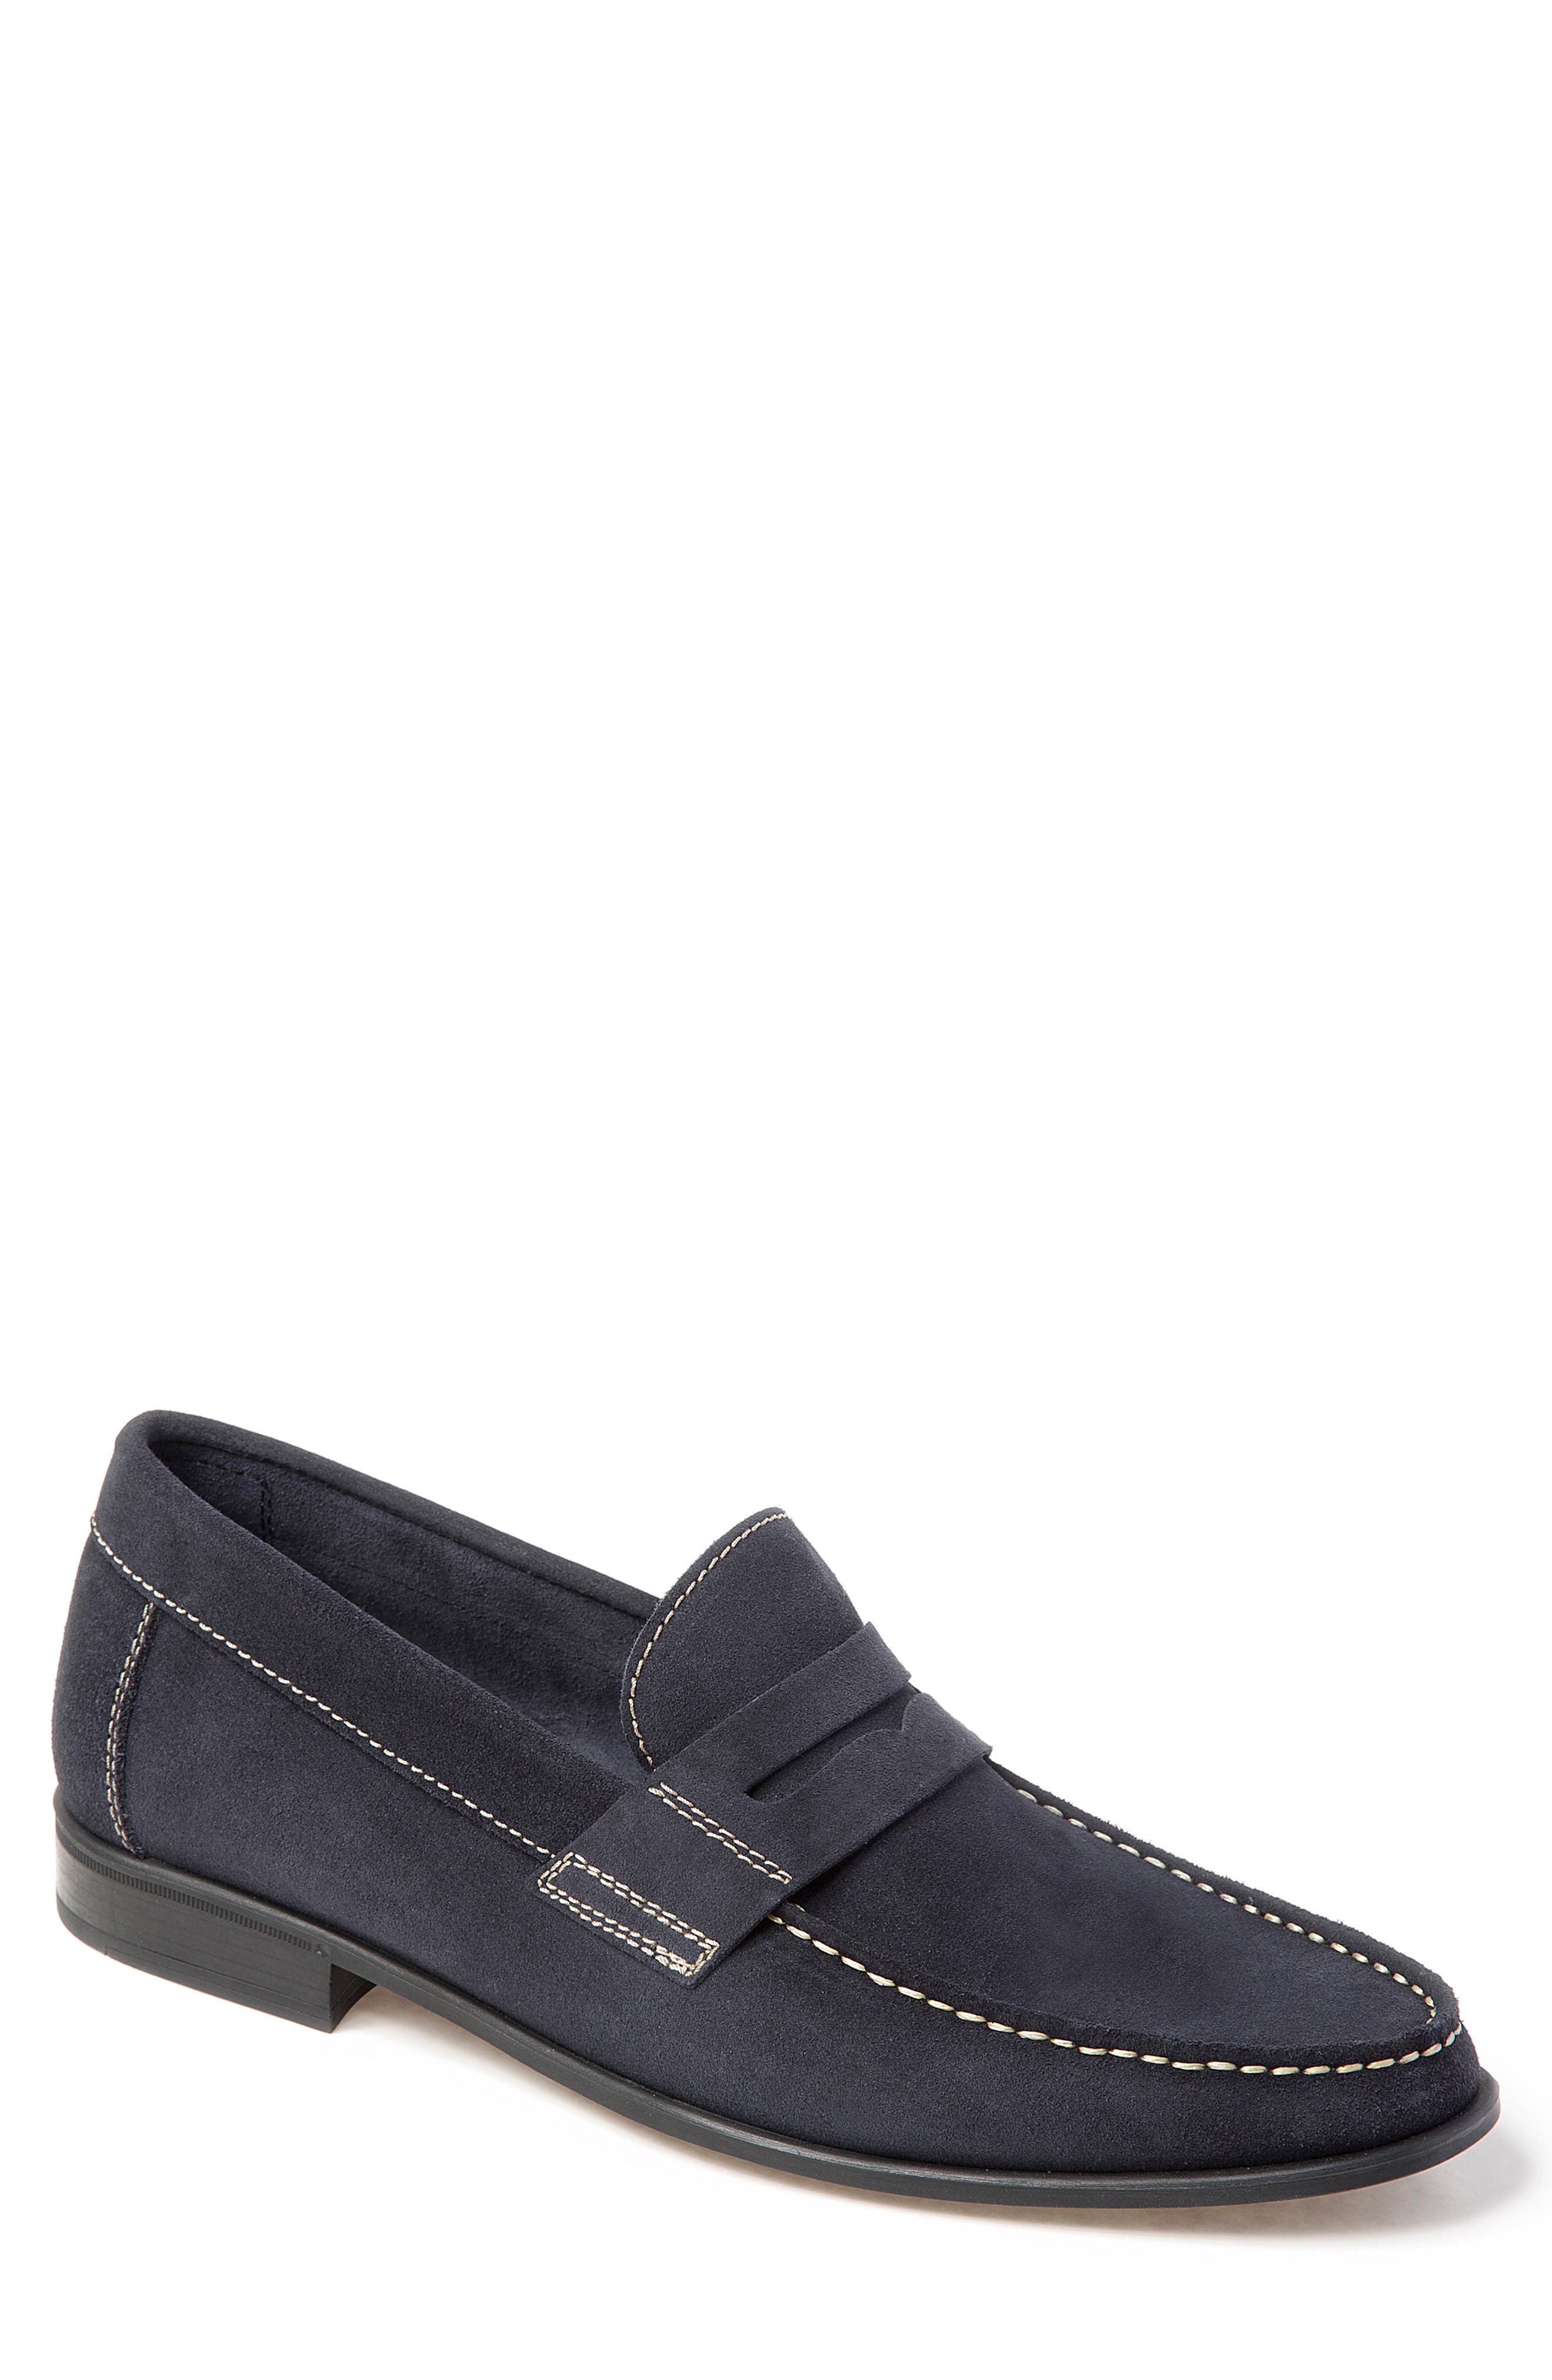 Sandro Moscoloni Leo Moc Toe Penny Loafer In Blue